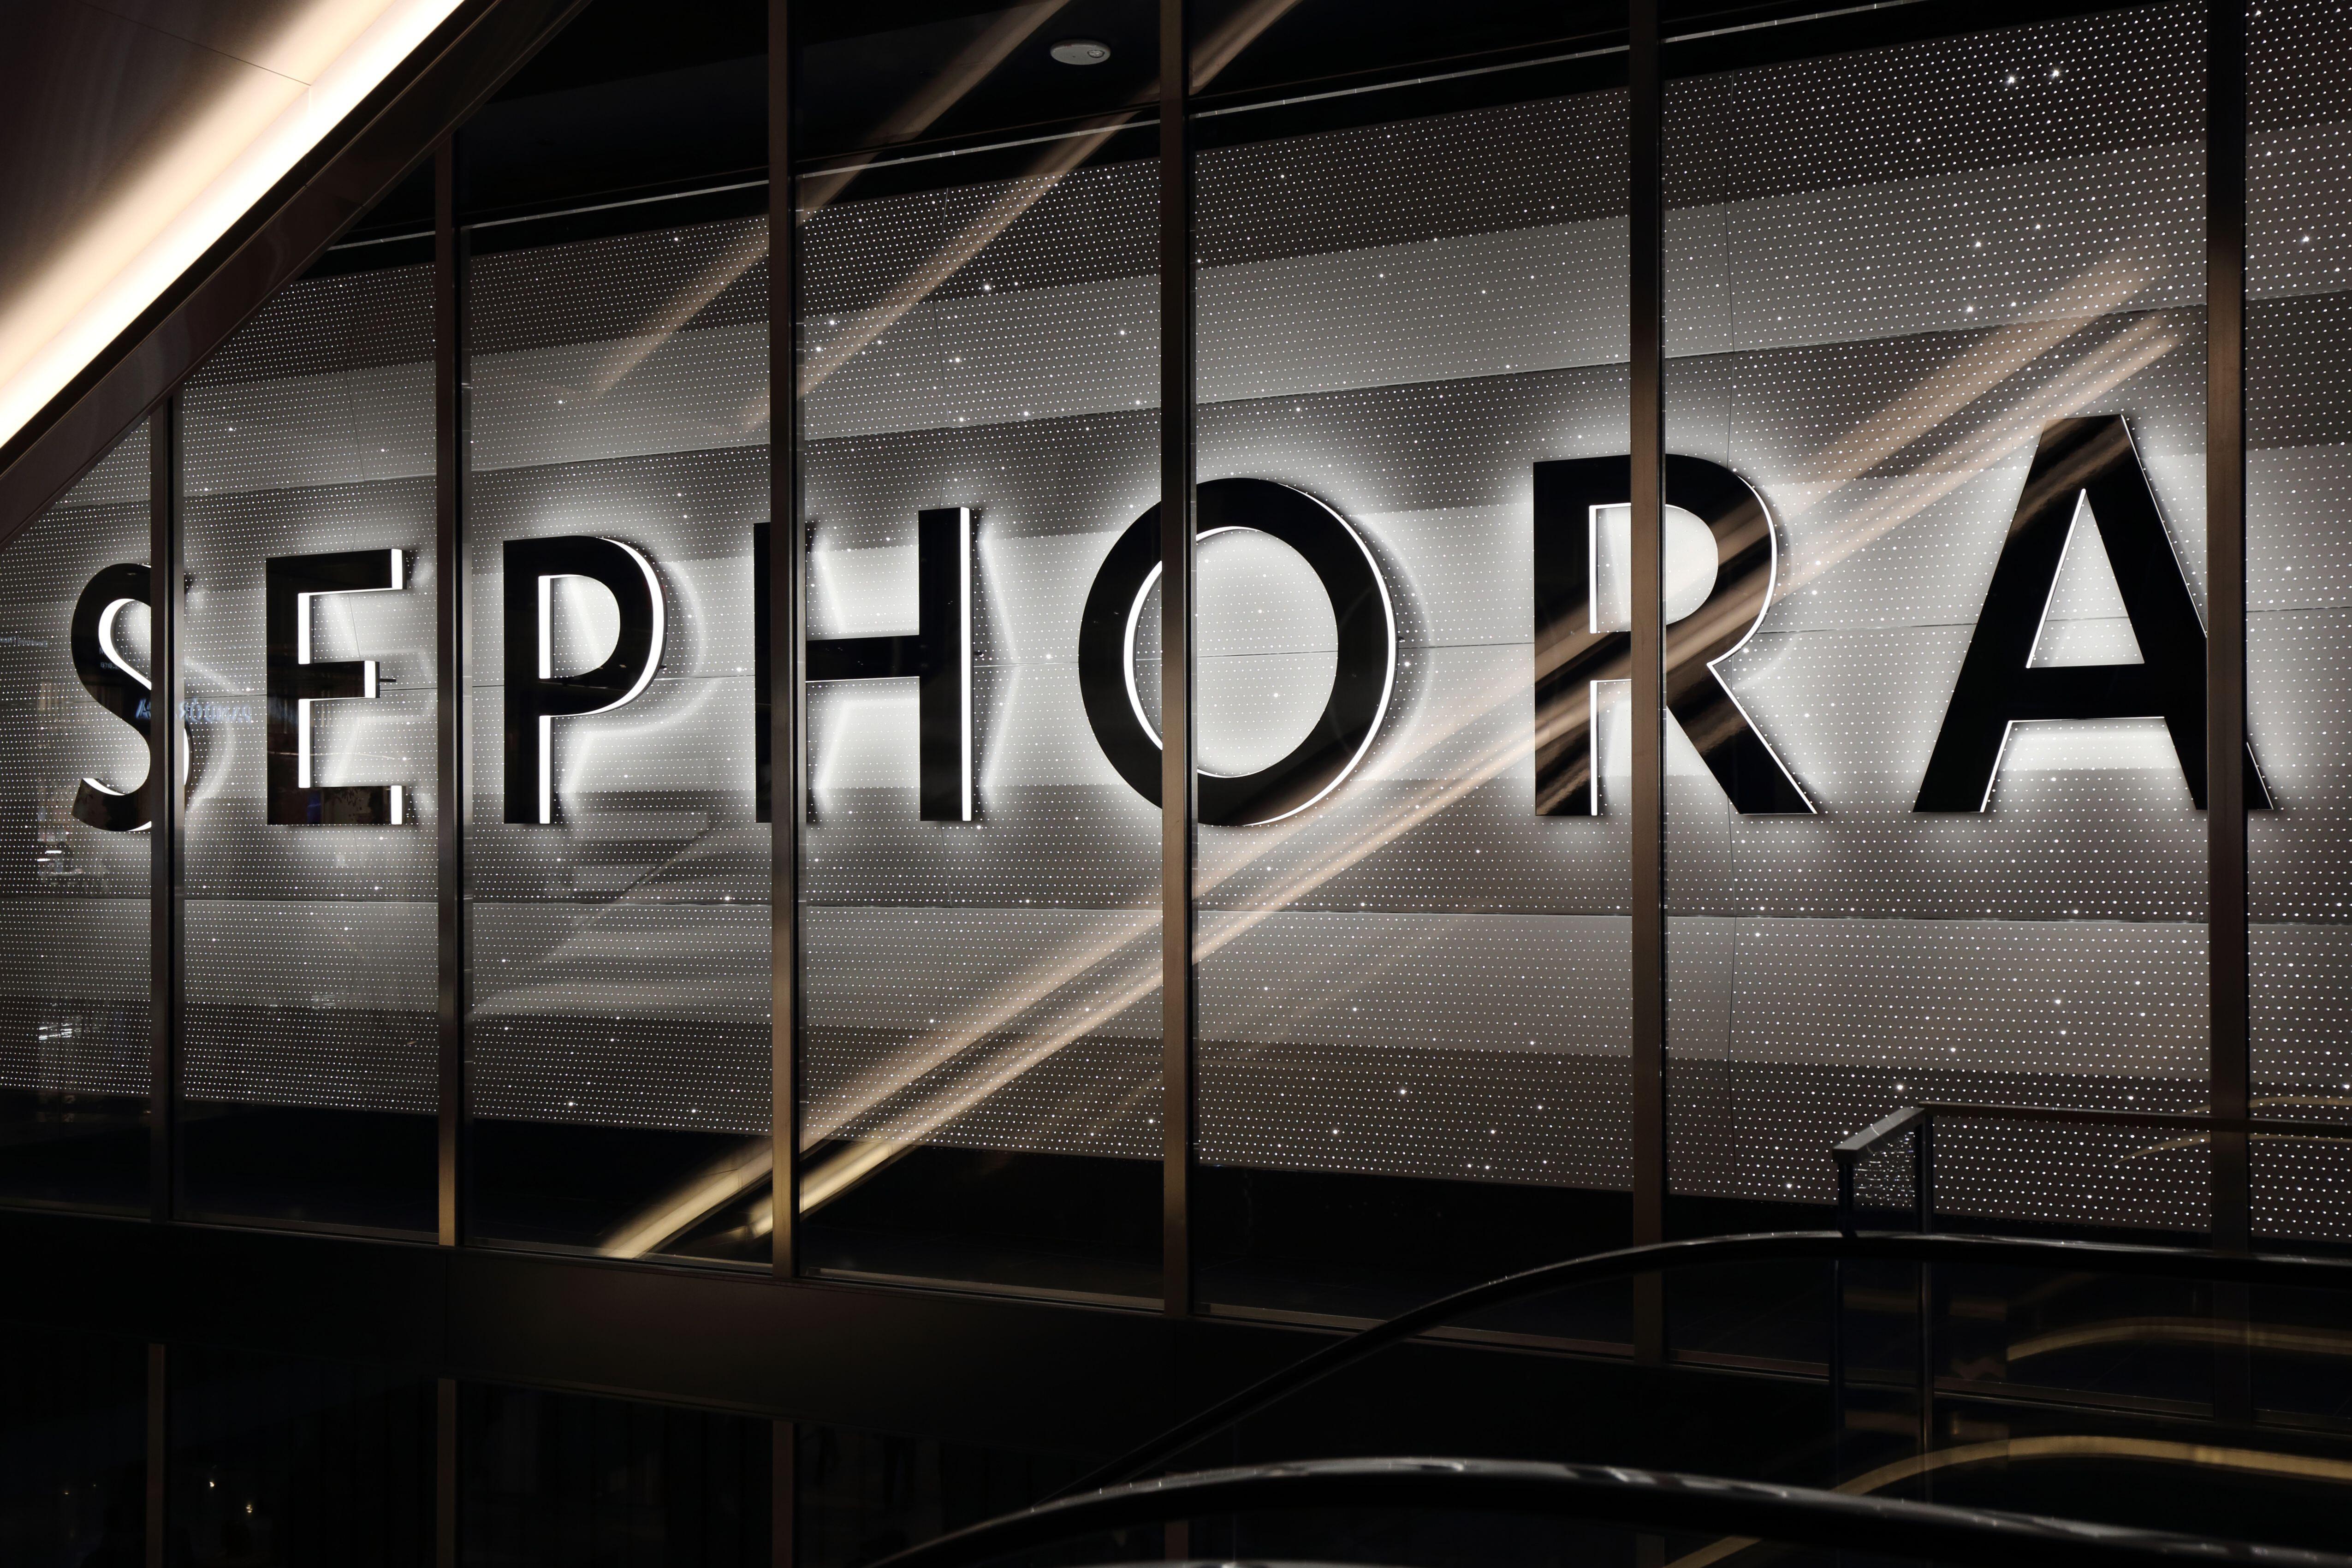 Sephora opens its doors in West London. Sephora's first UK store